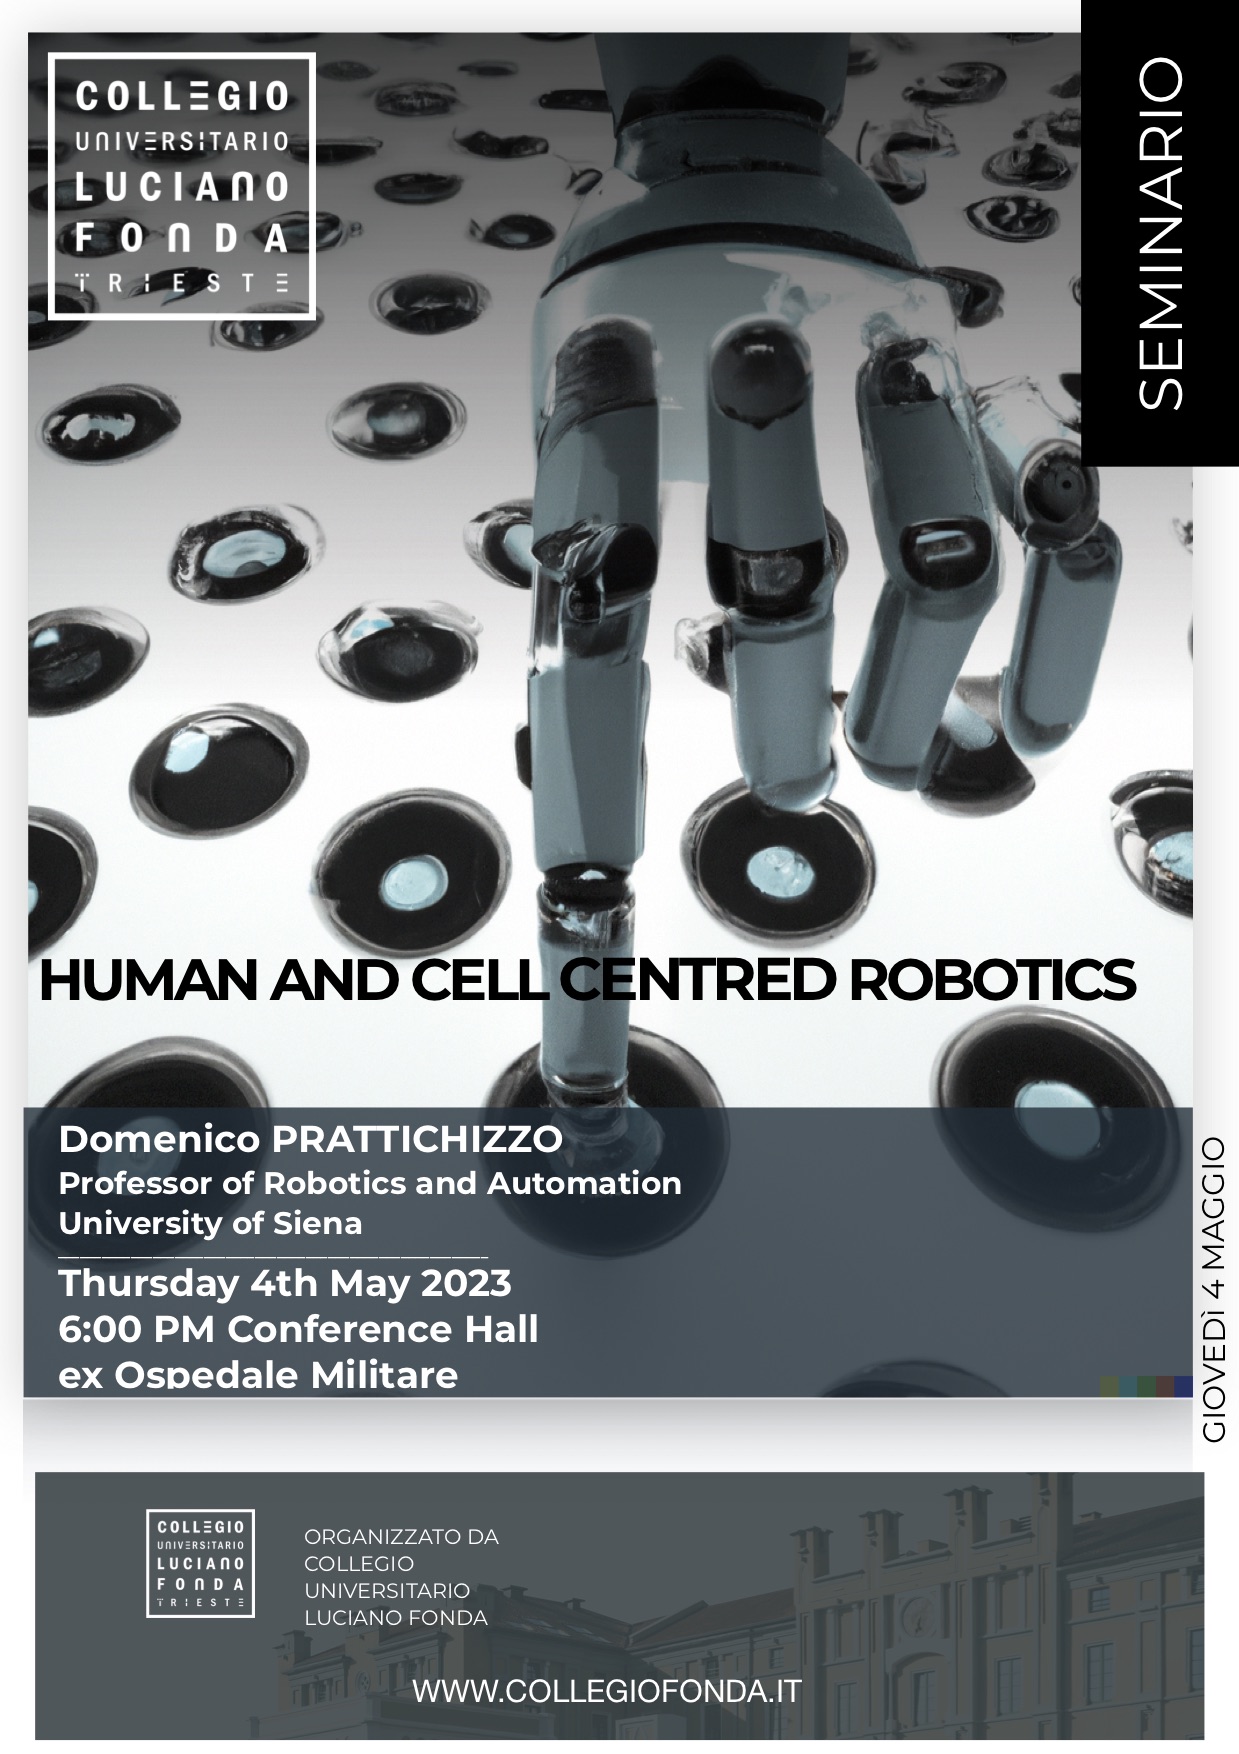 HUMAN AND CELL CENTRED ROBOTICS – Thursday, 4th of May 2023 – Seminar by Domenico Prattichizzo